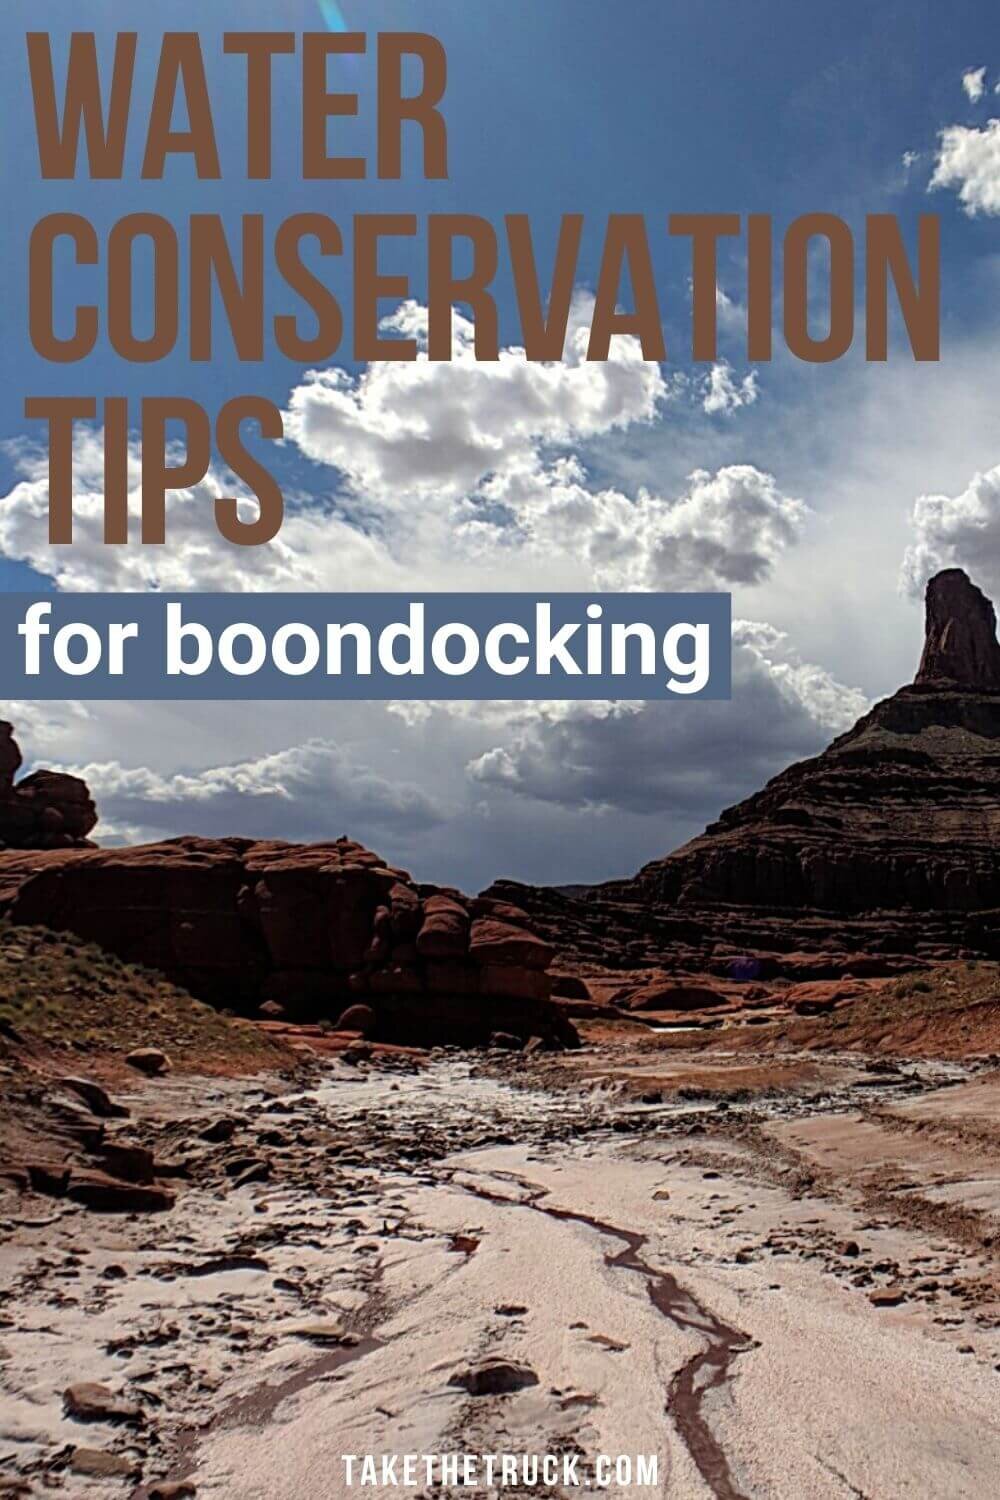 This post is all about wild camping hacks and boondocking tips on conserving water when camping with no hookups. Special tips for saving water when tent, car or truck camping with minimal water.